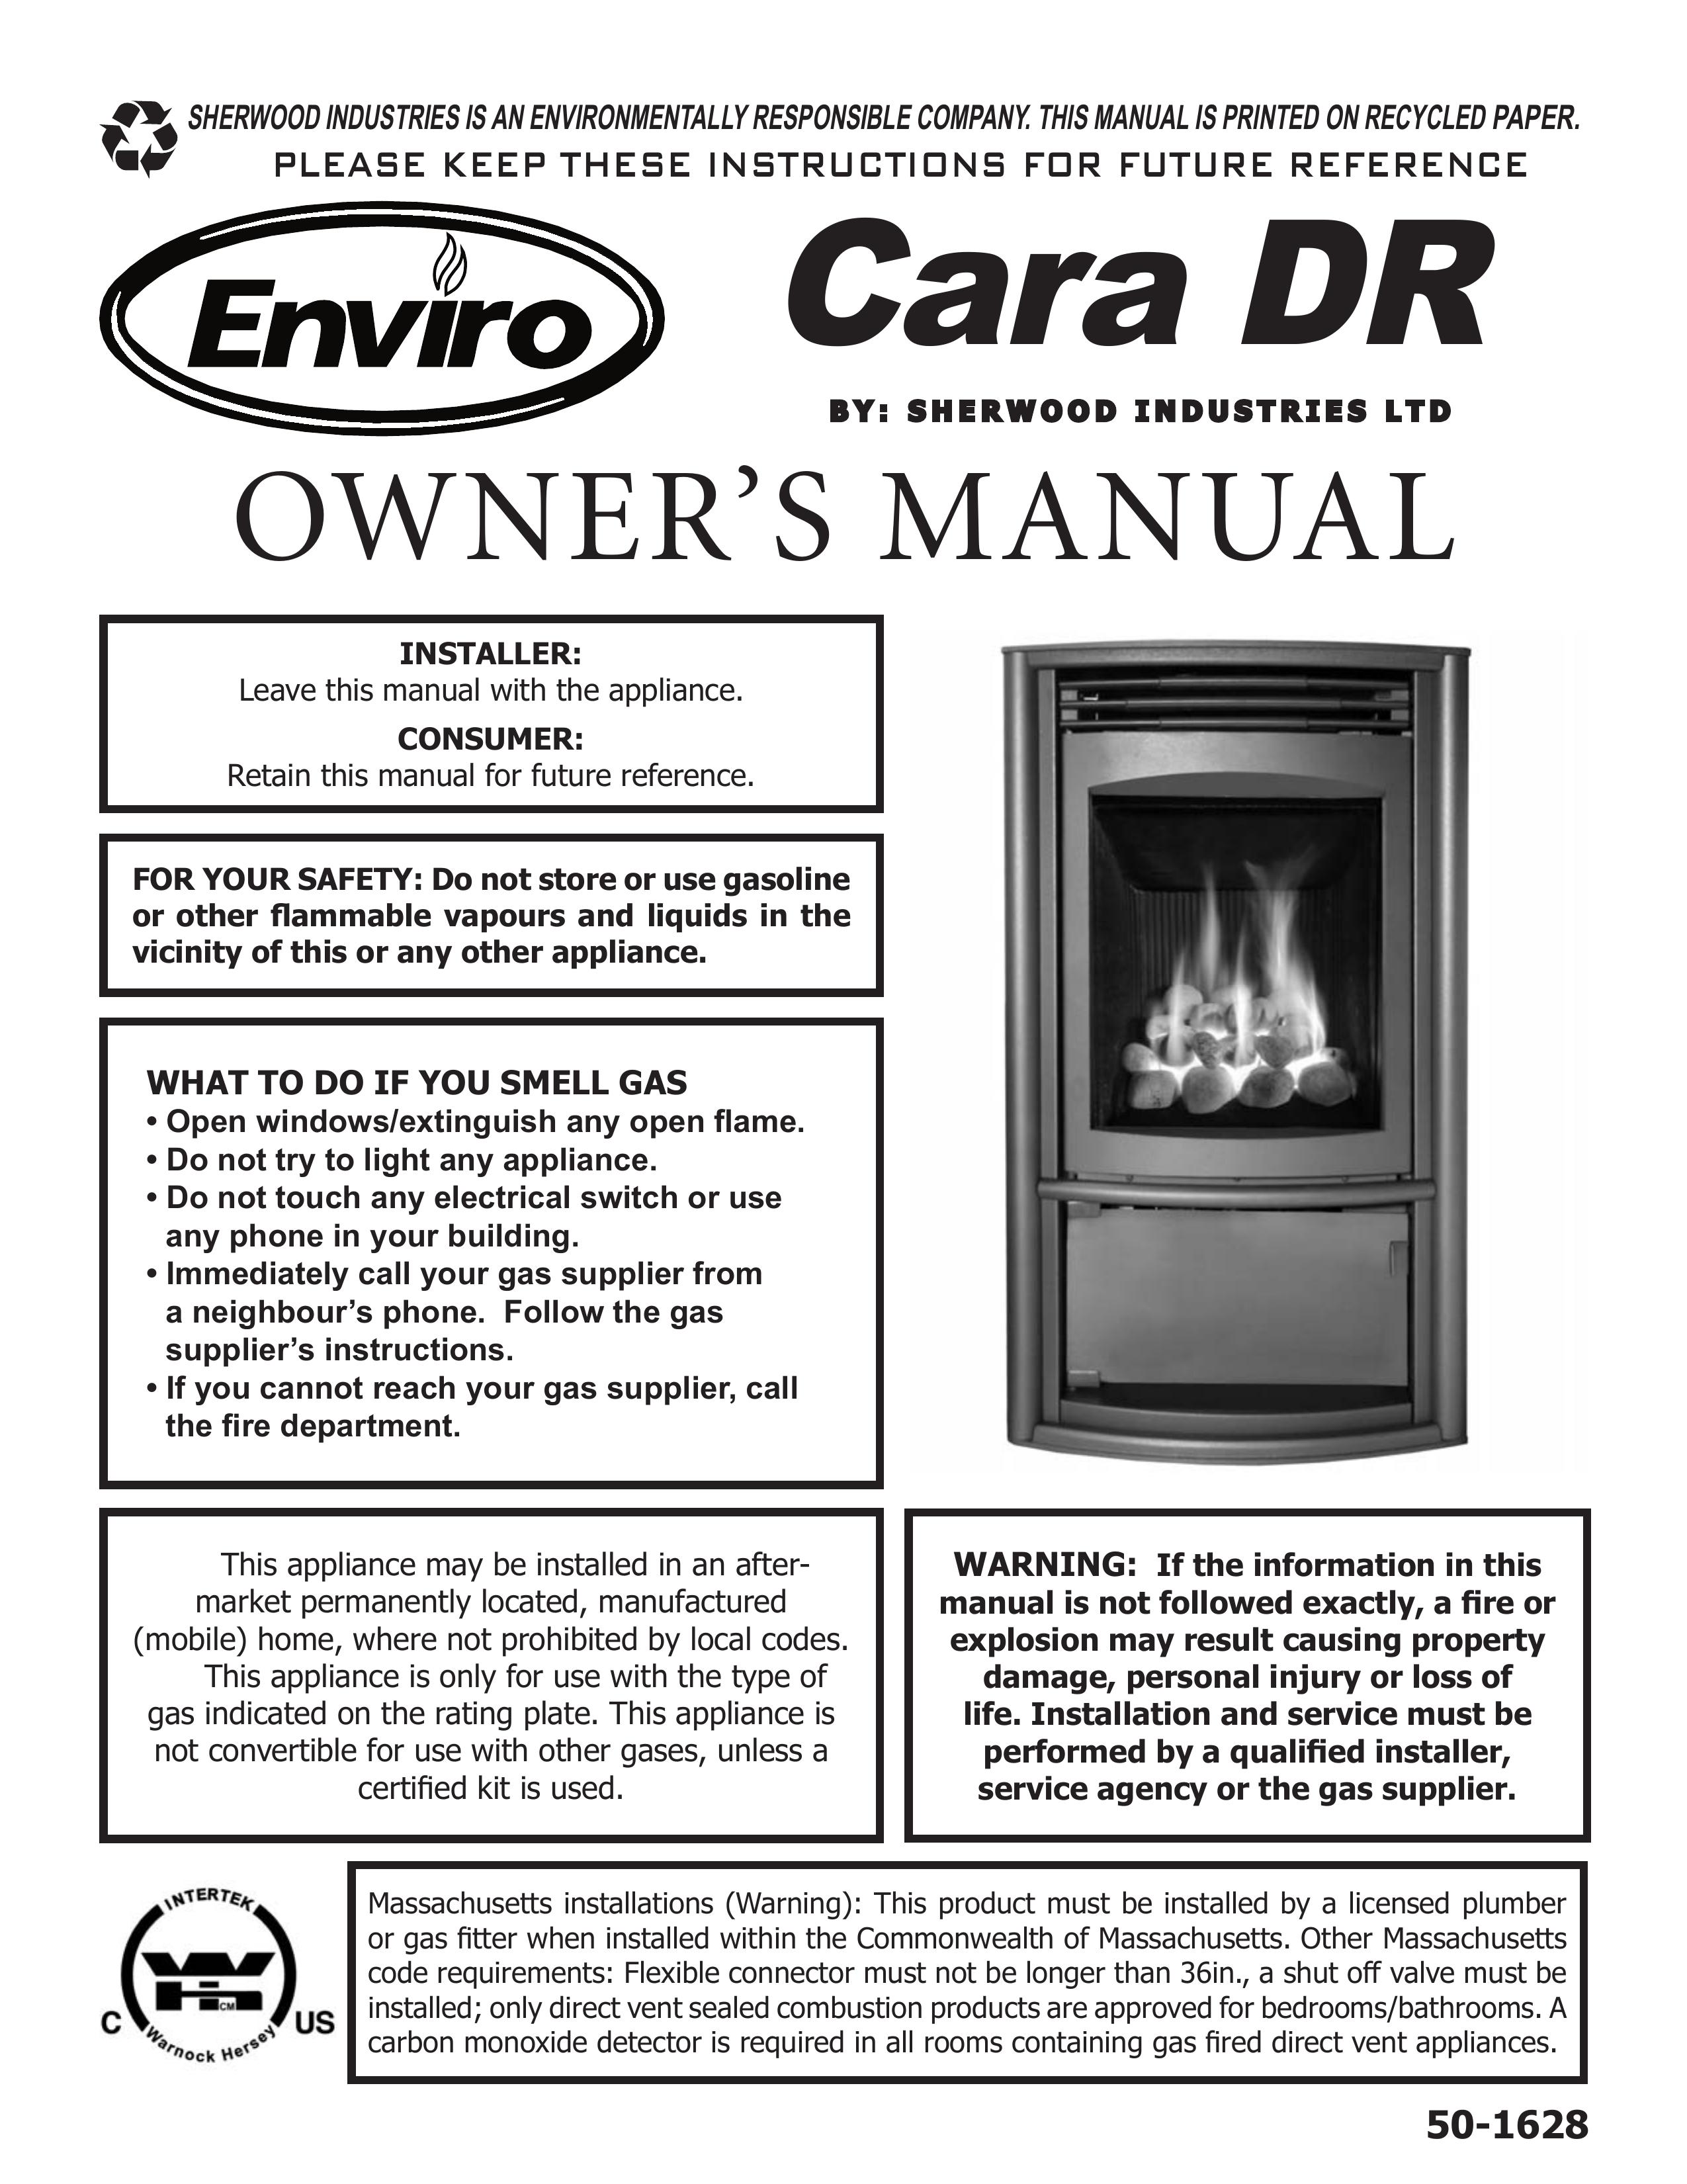 Enviro 50-1628 Fire Pit User Manual (Page 1)